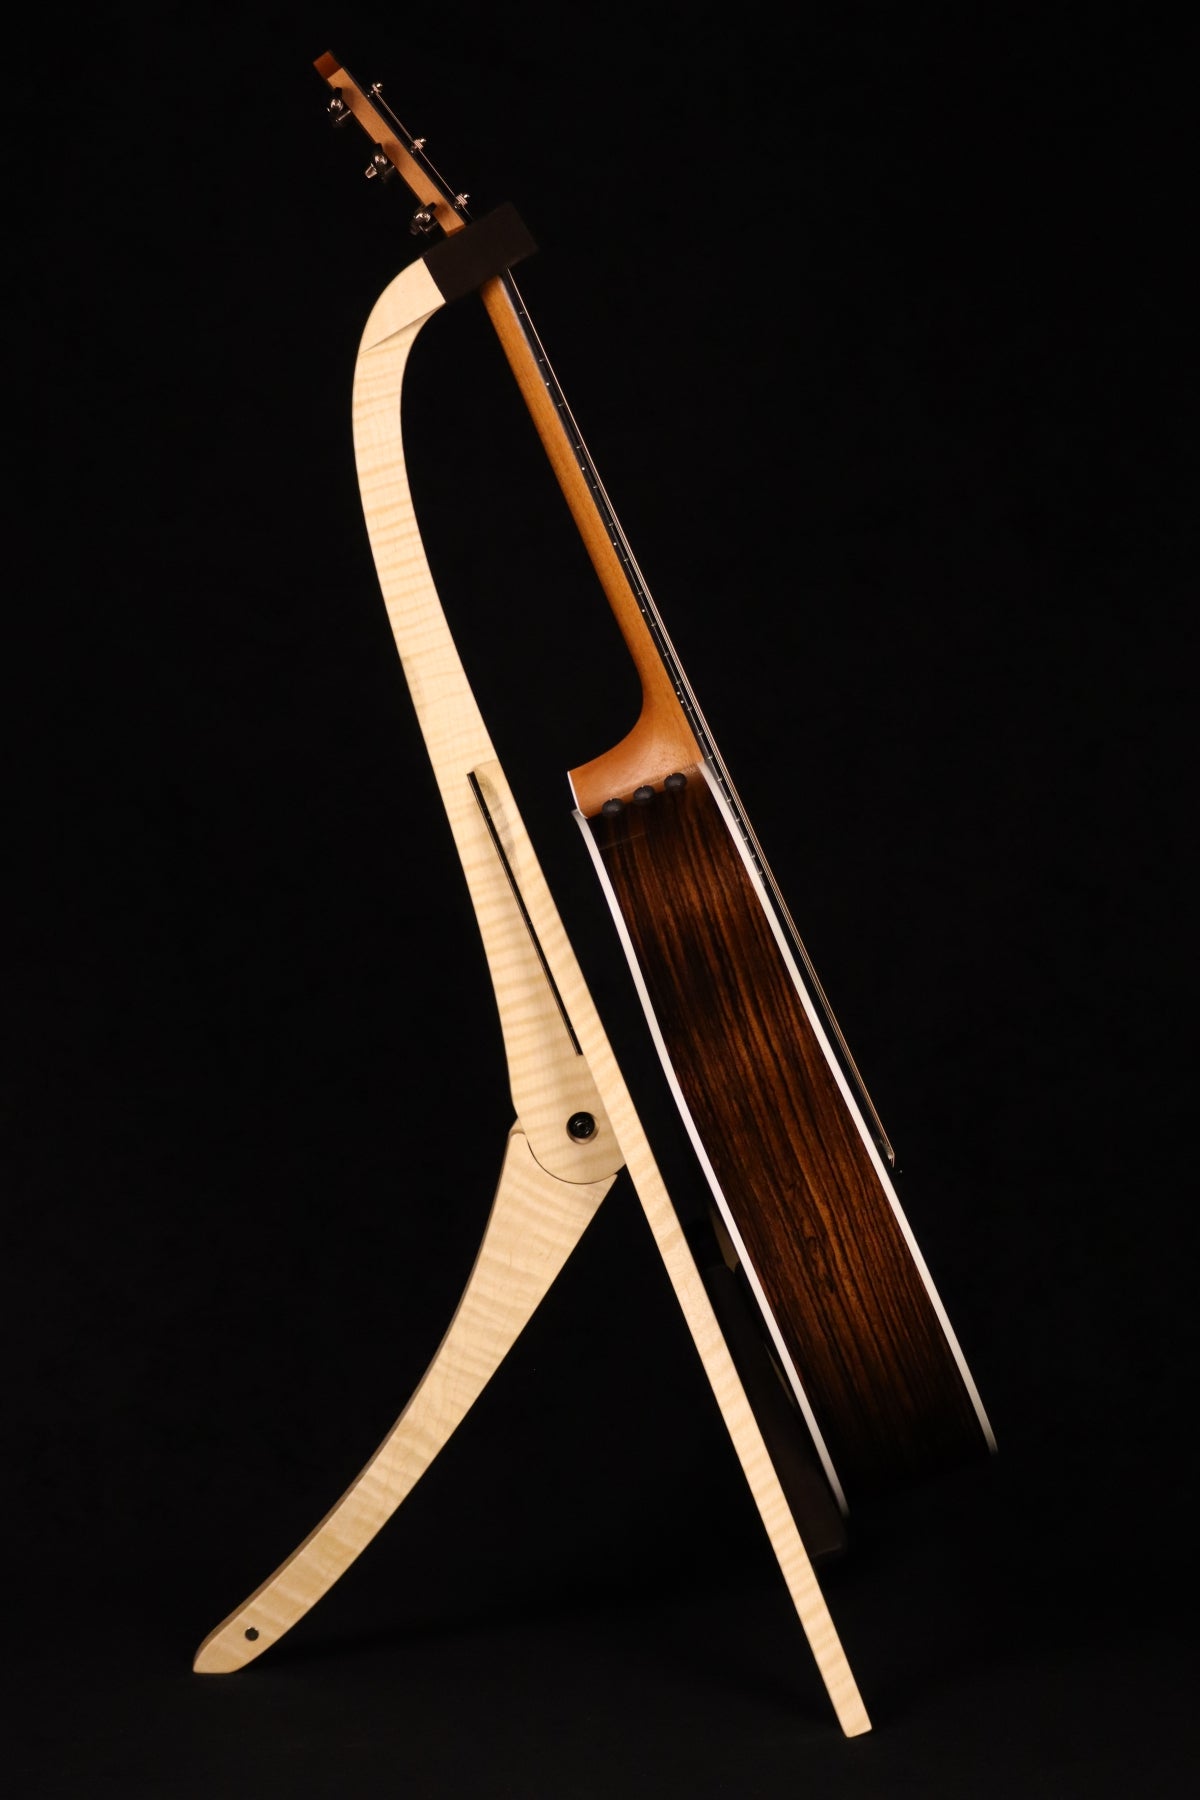 Folding curly maple wood guitar floor stand full side image with Taylor guitar